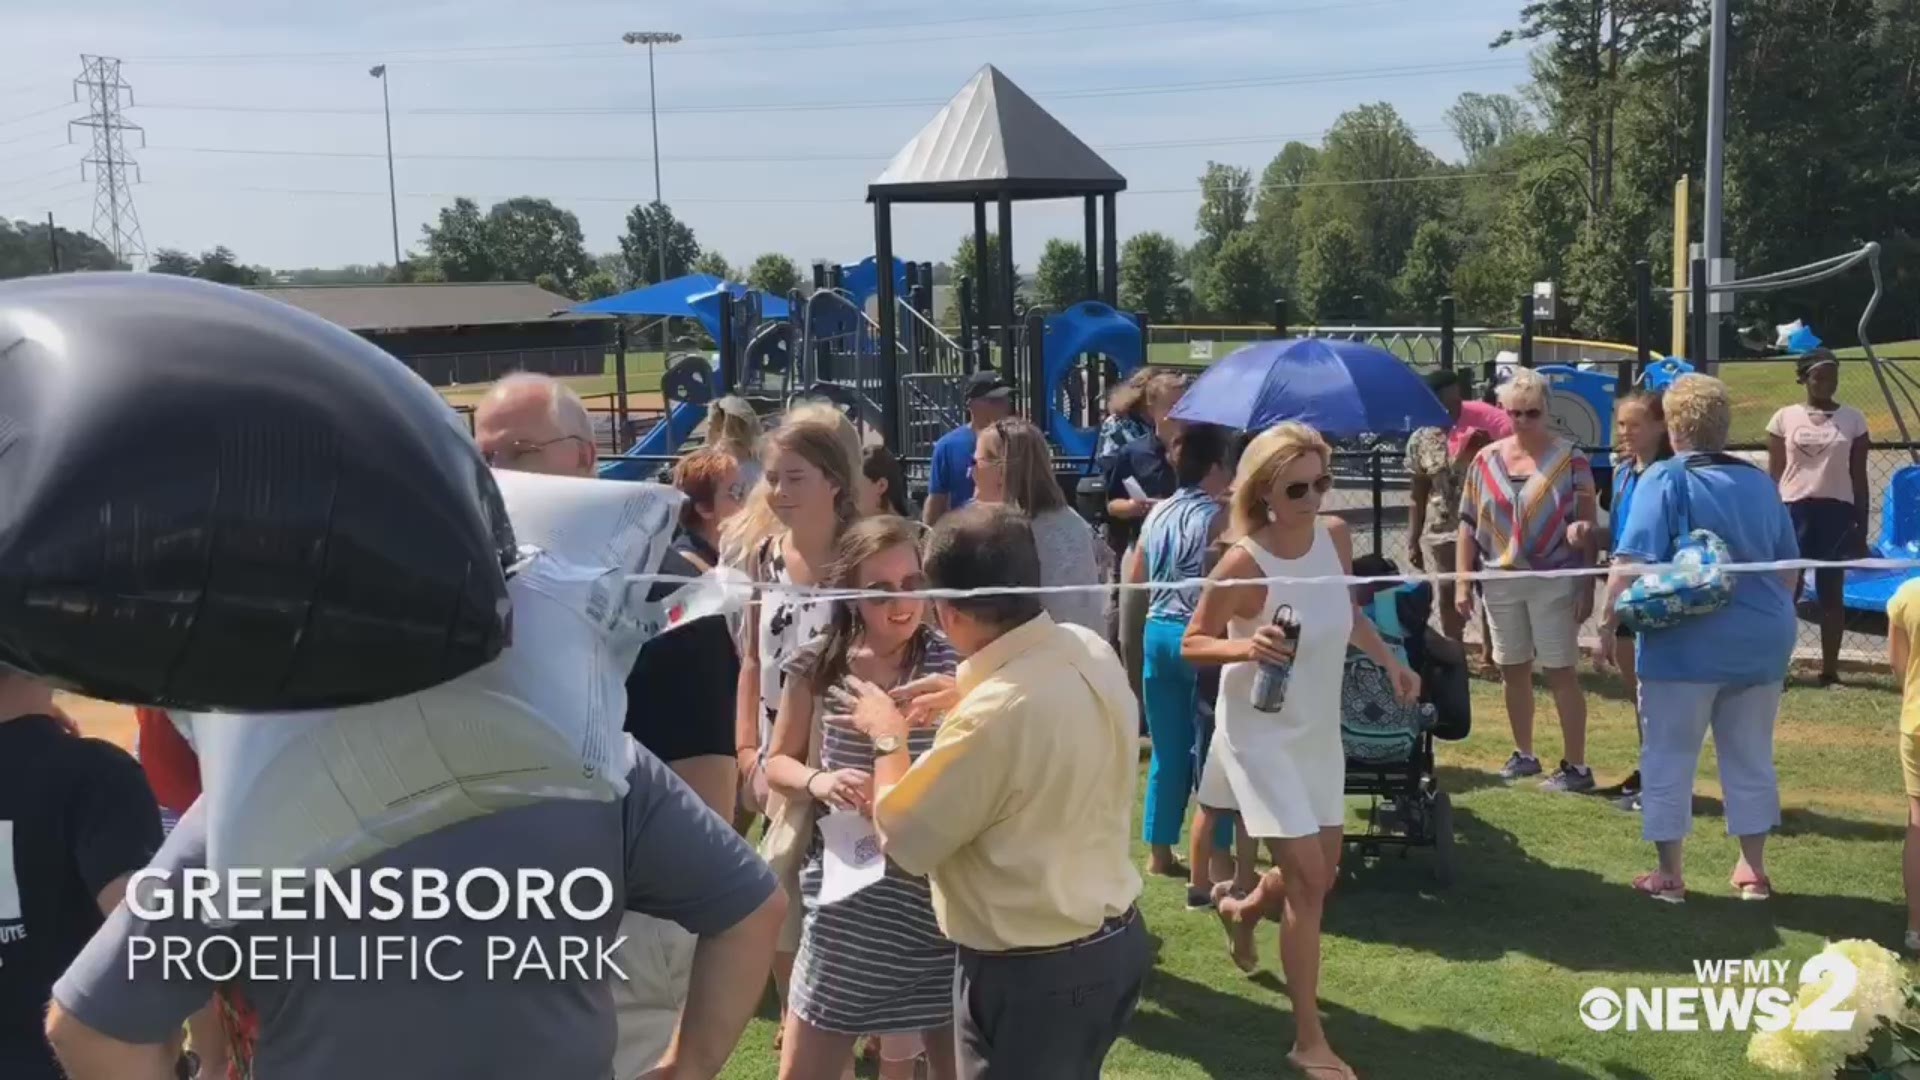 Former Carolina Panthers favorite Ricky Proehl literally evened the playing field for all kids in Guilford County. The Proehl family and a host of community supporters cut the ribbon today on an all inclusive play ground.